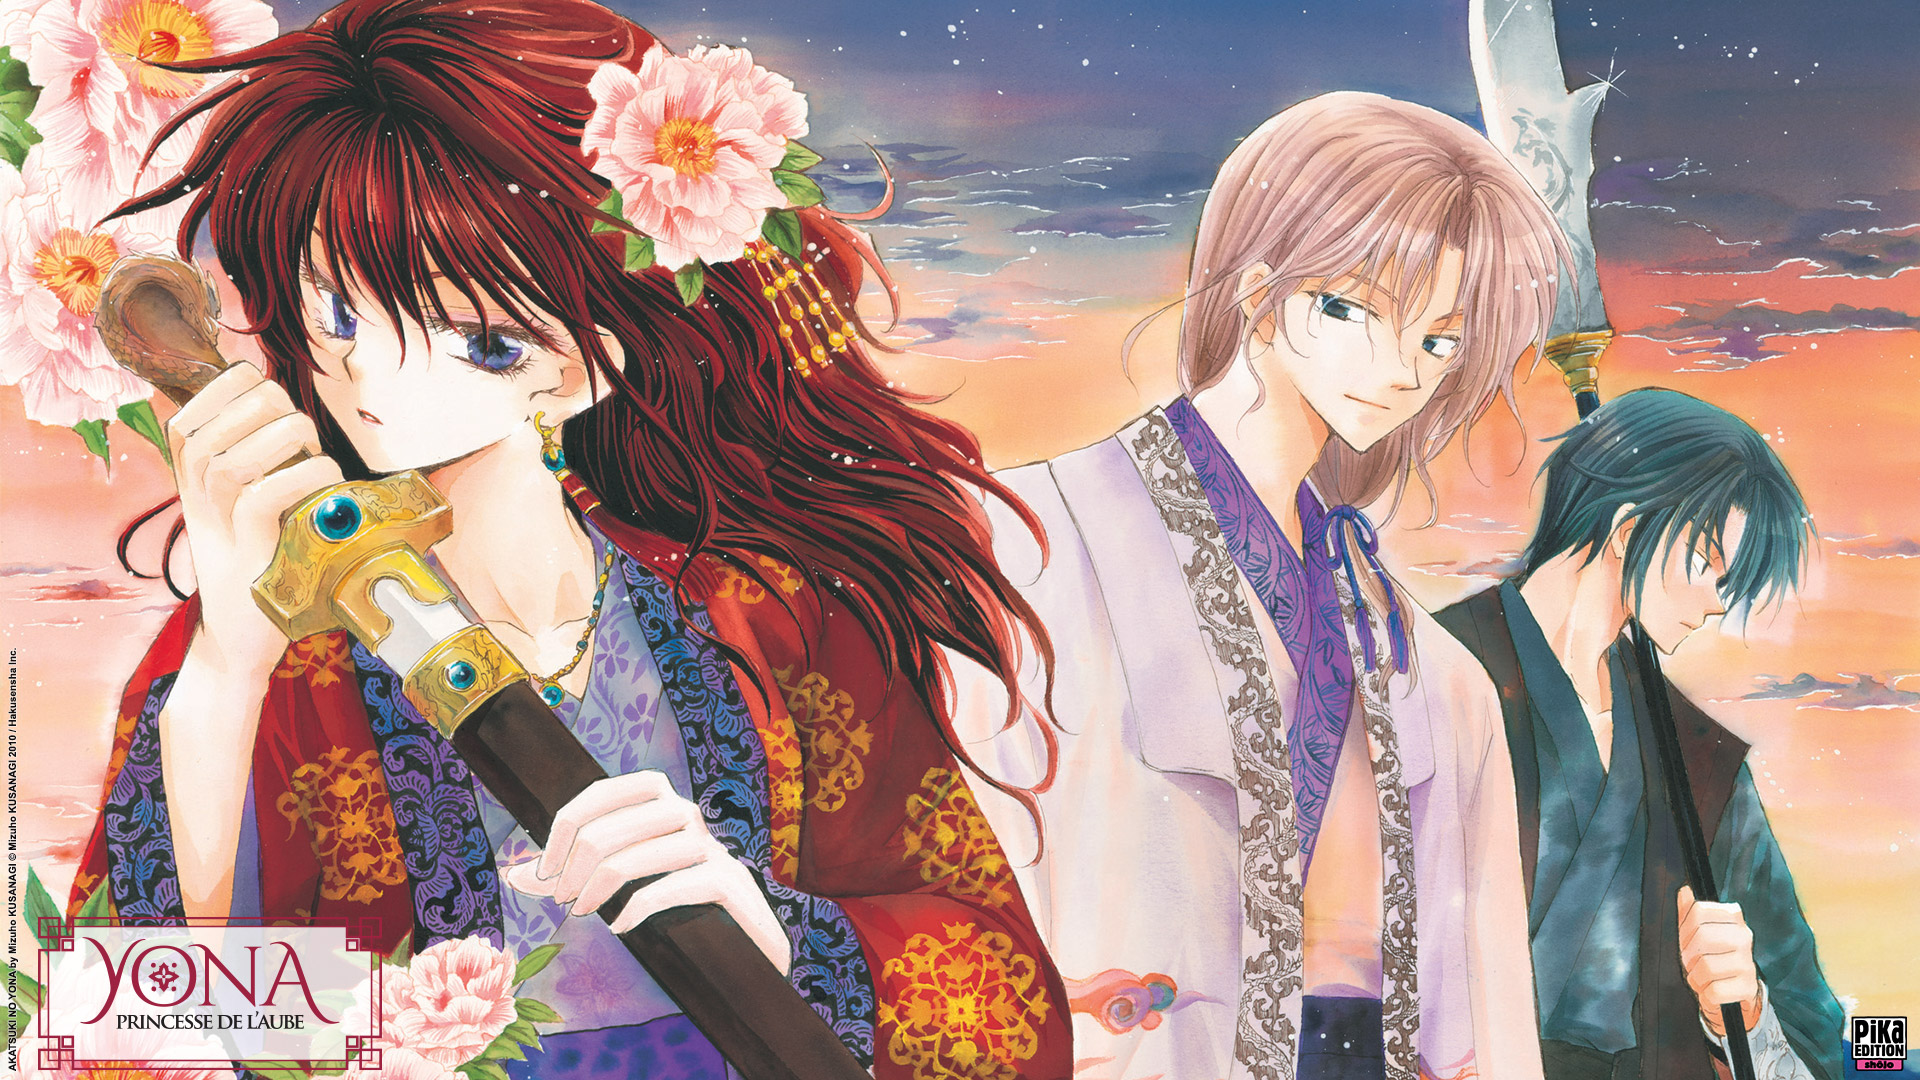 Akatsuki No Yona Wallpaper Released By The French Publisher Pika